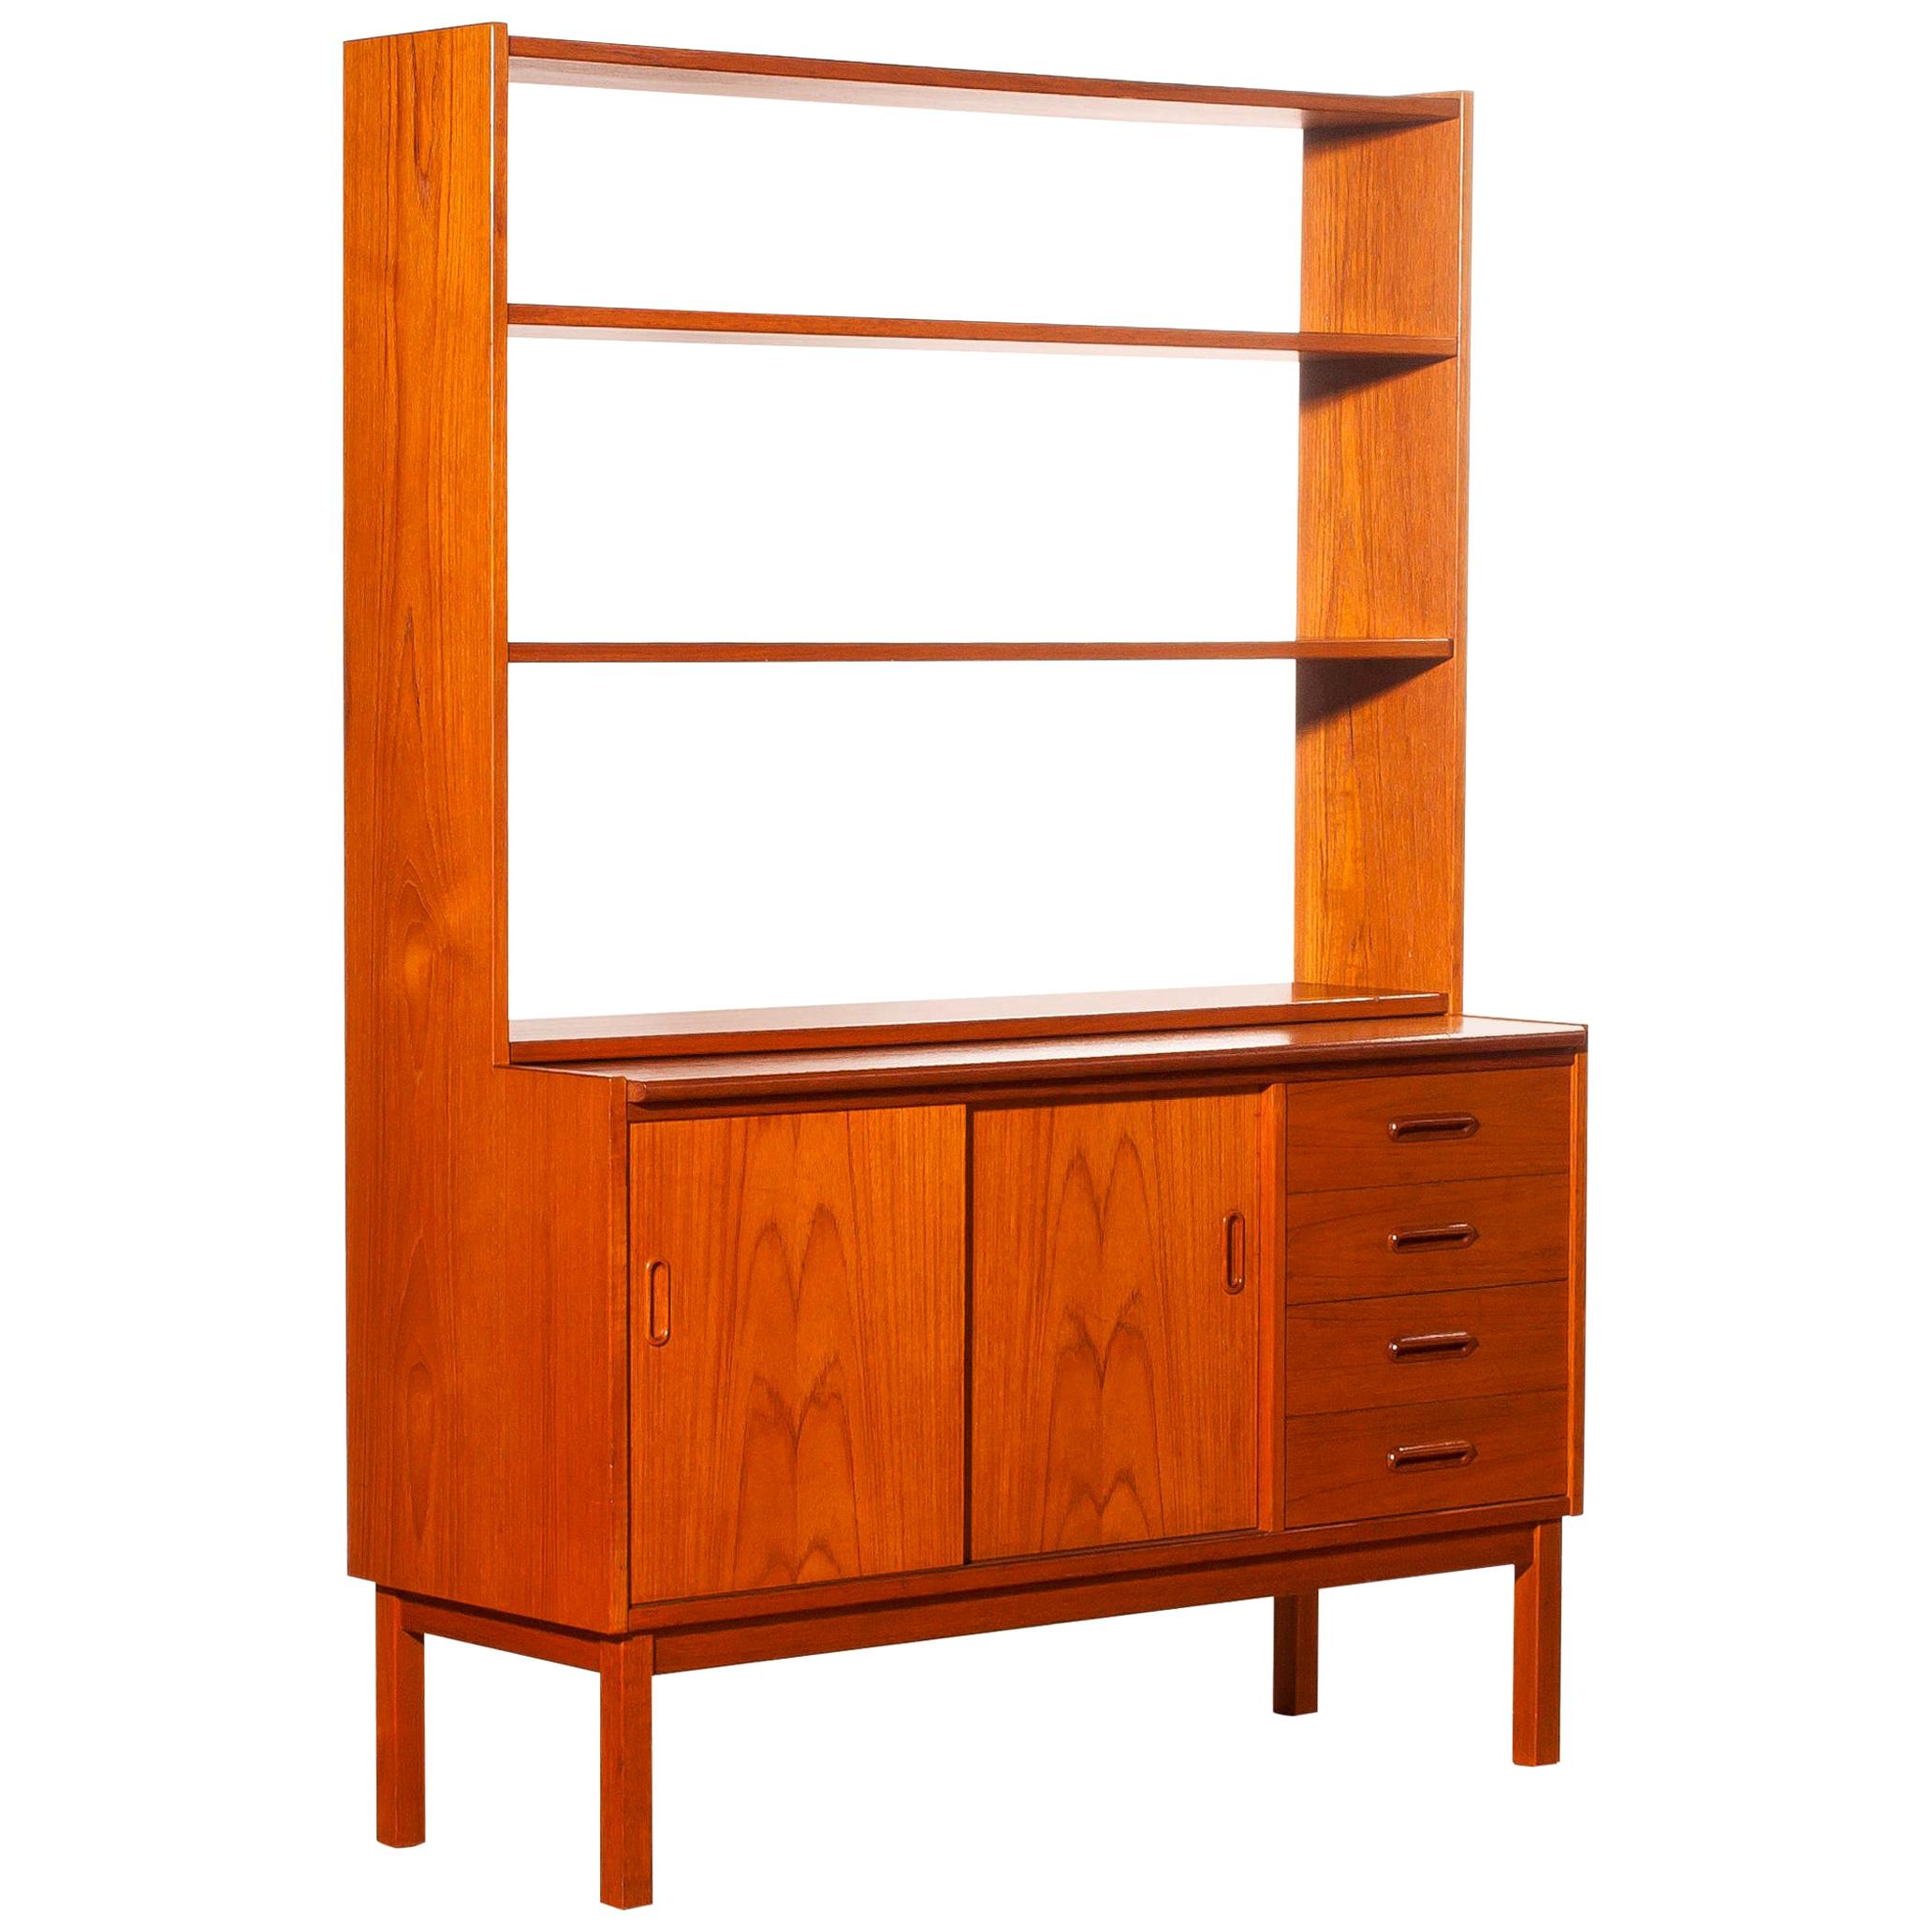 1960s, Teak Bookcase with Slid Able Writing or Working Space from Sweden In Good Condition In Silvolde, Gelderland